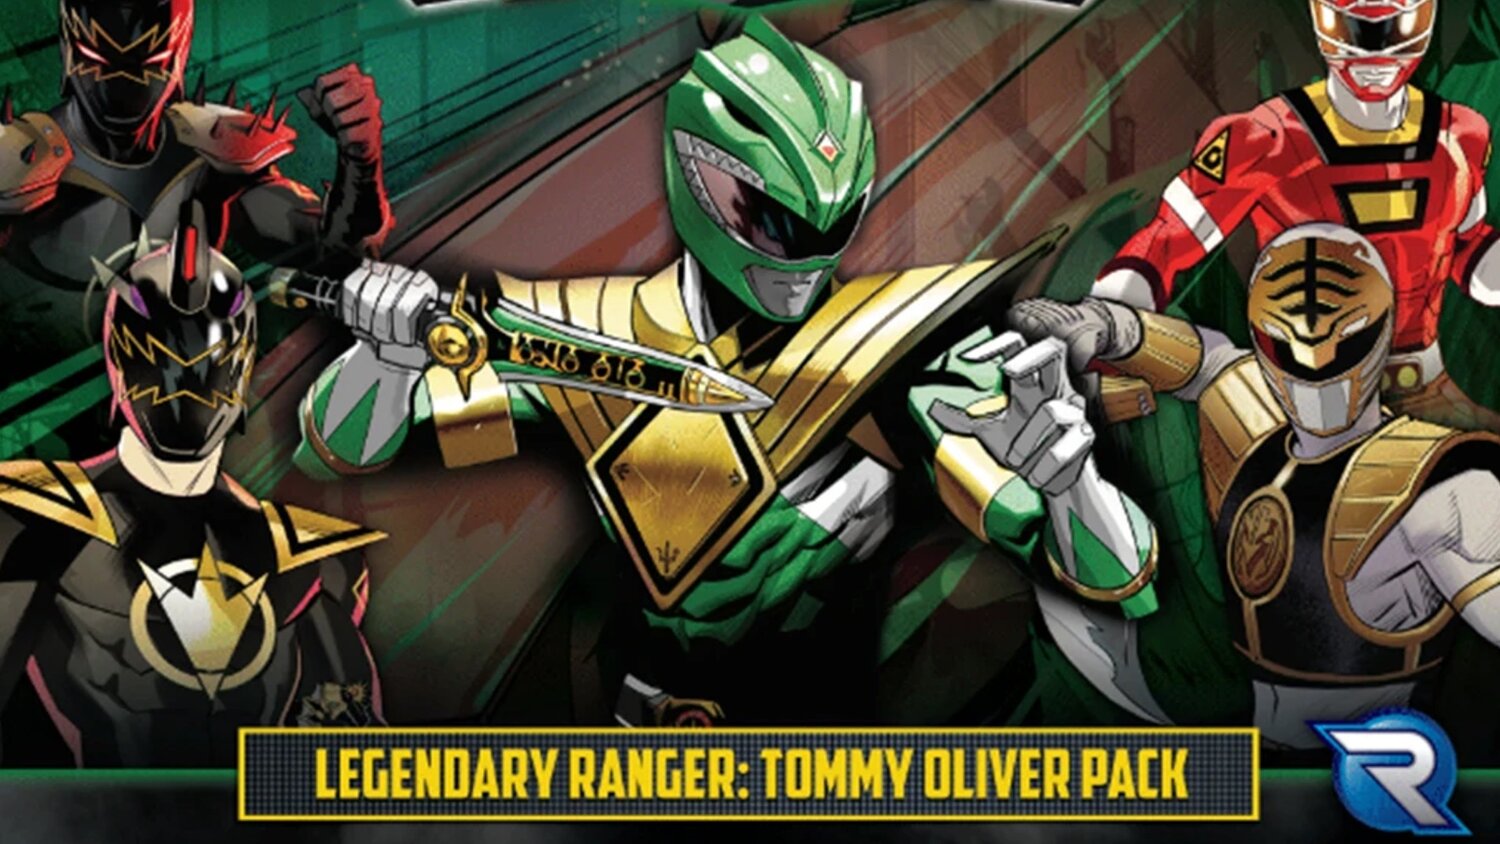 A Look at the LEGENDARY RANGER: TOMMY OLIVER PACK Expansion for POWER RANGERS: HEROES OF THE GRID